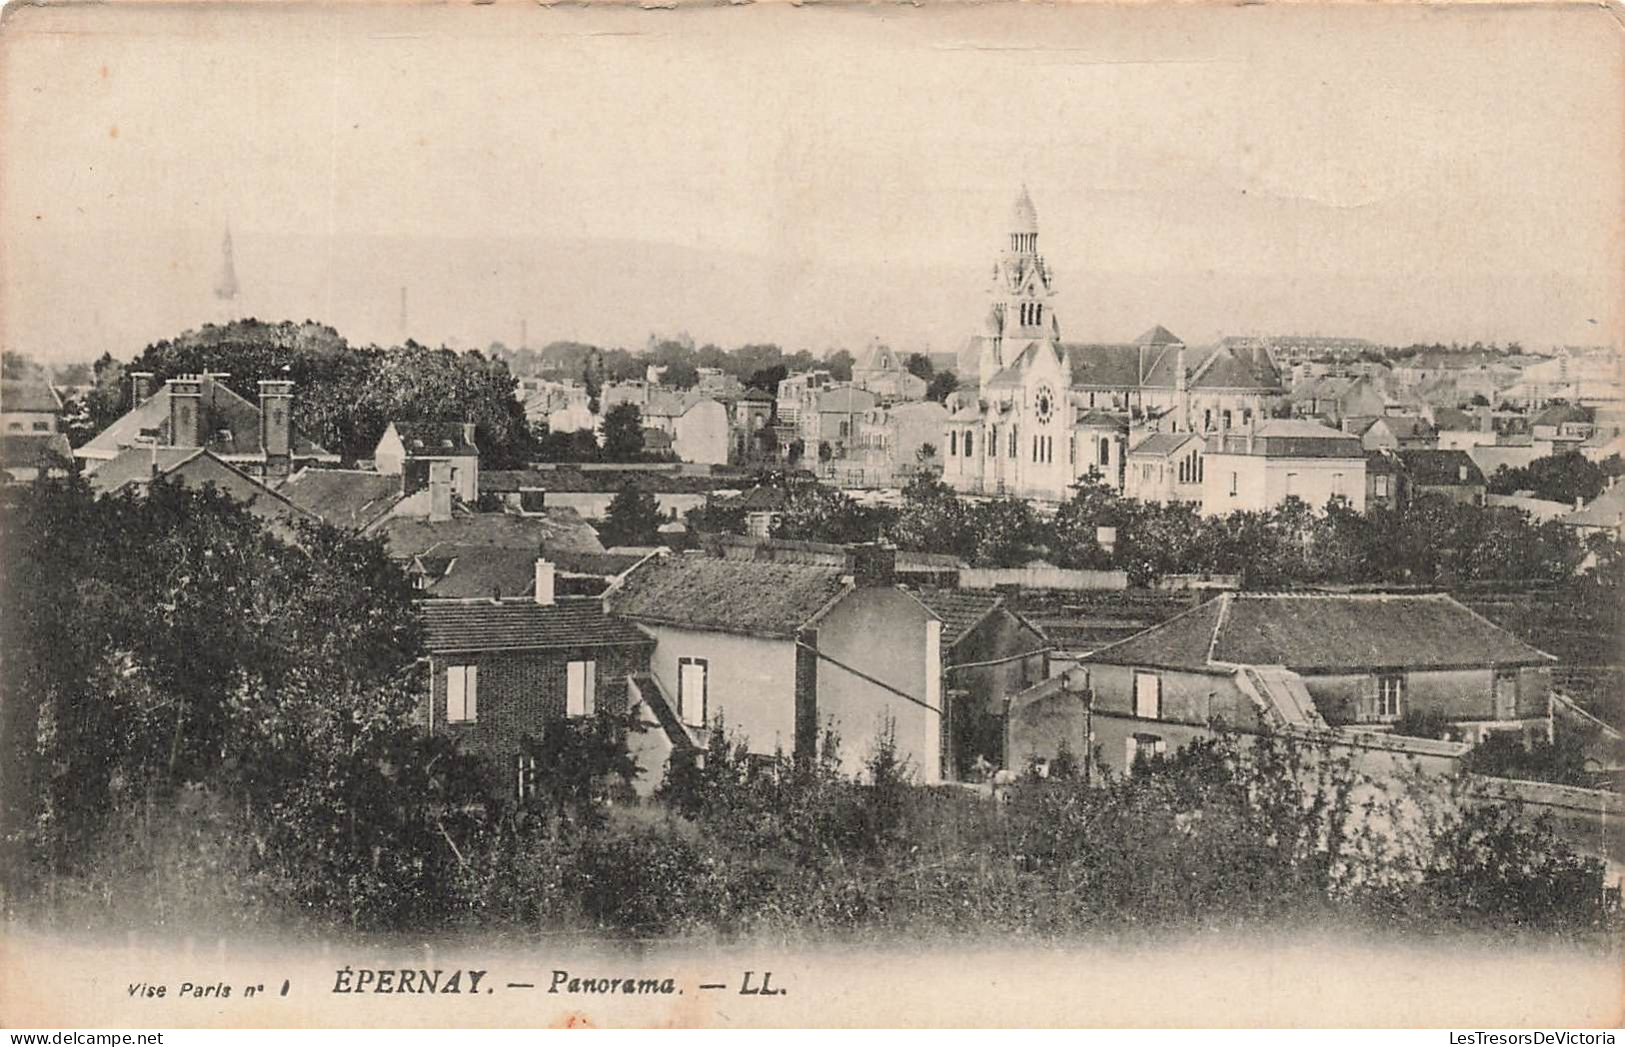 FRANCE - Epernay - Panorama - LL - Cathédrale - Carte Postale Ancienne - Epernay